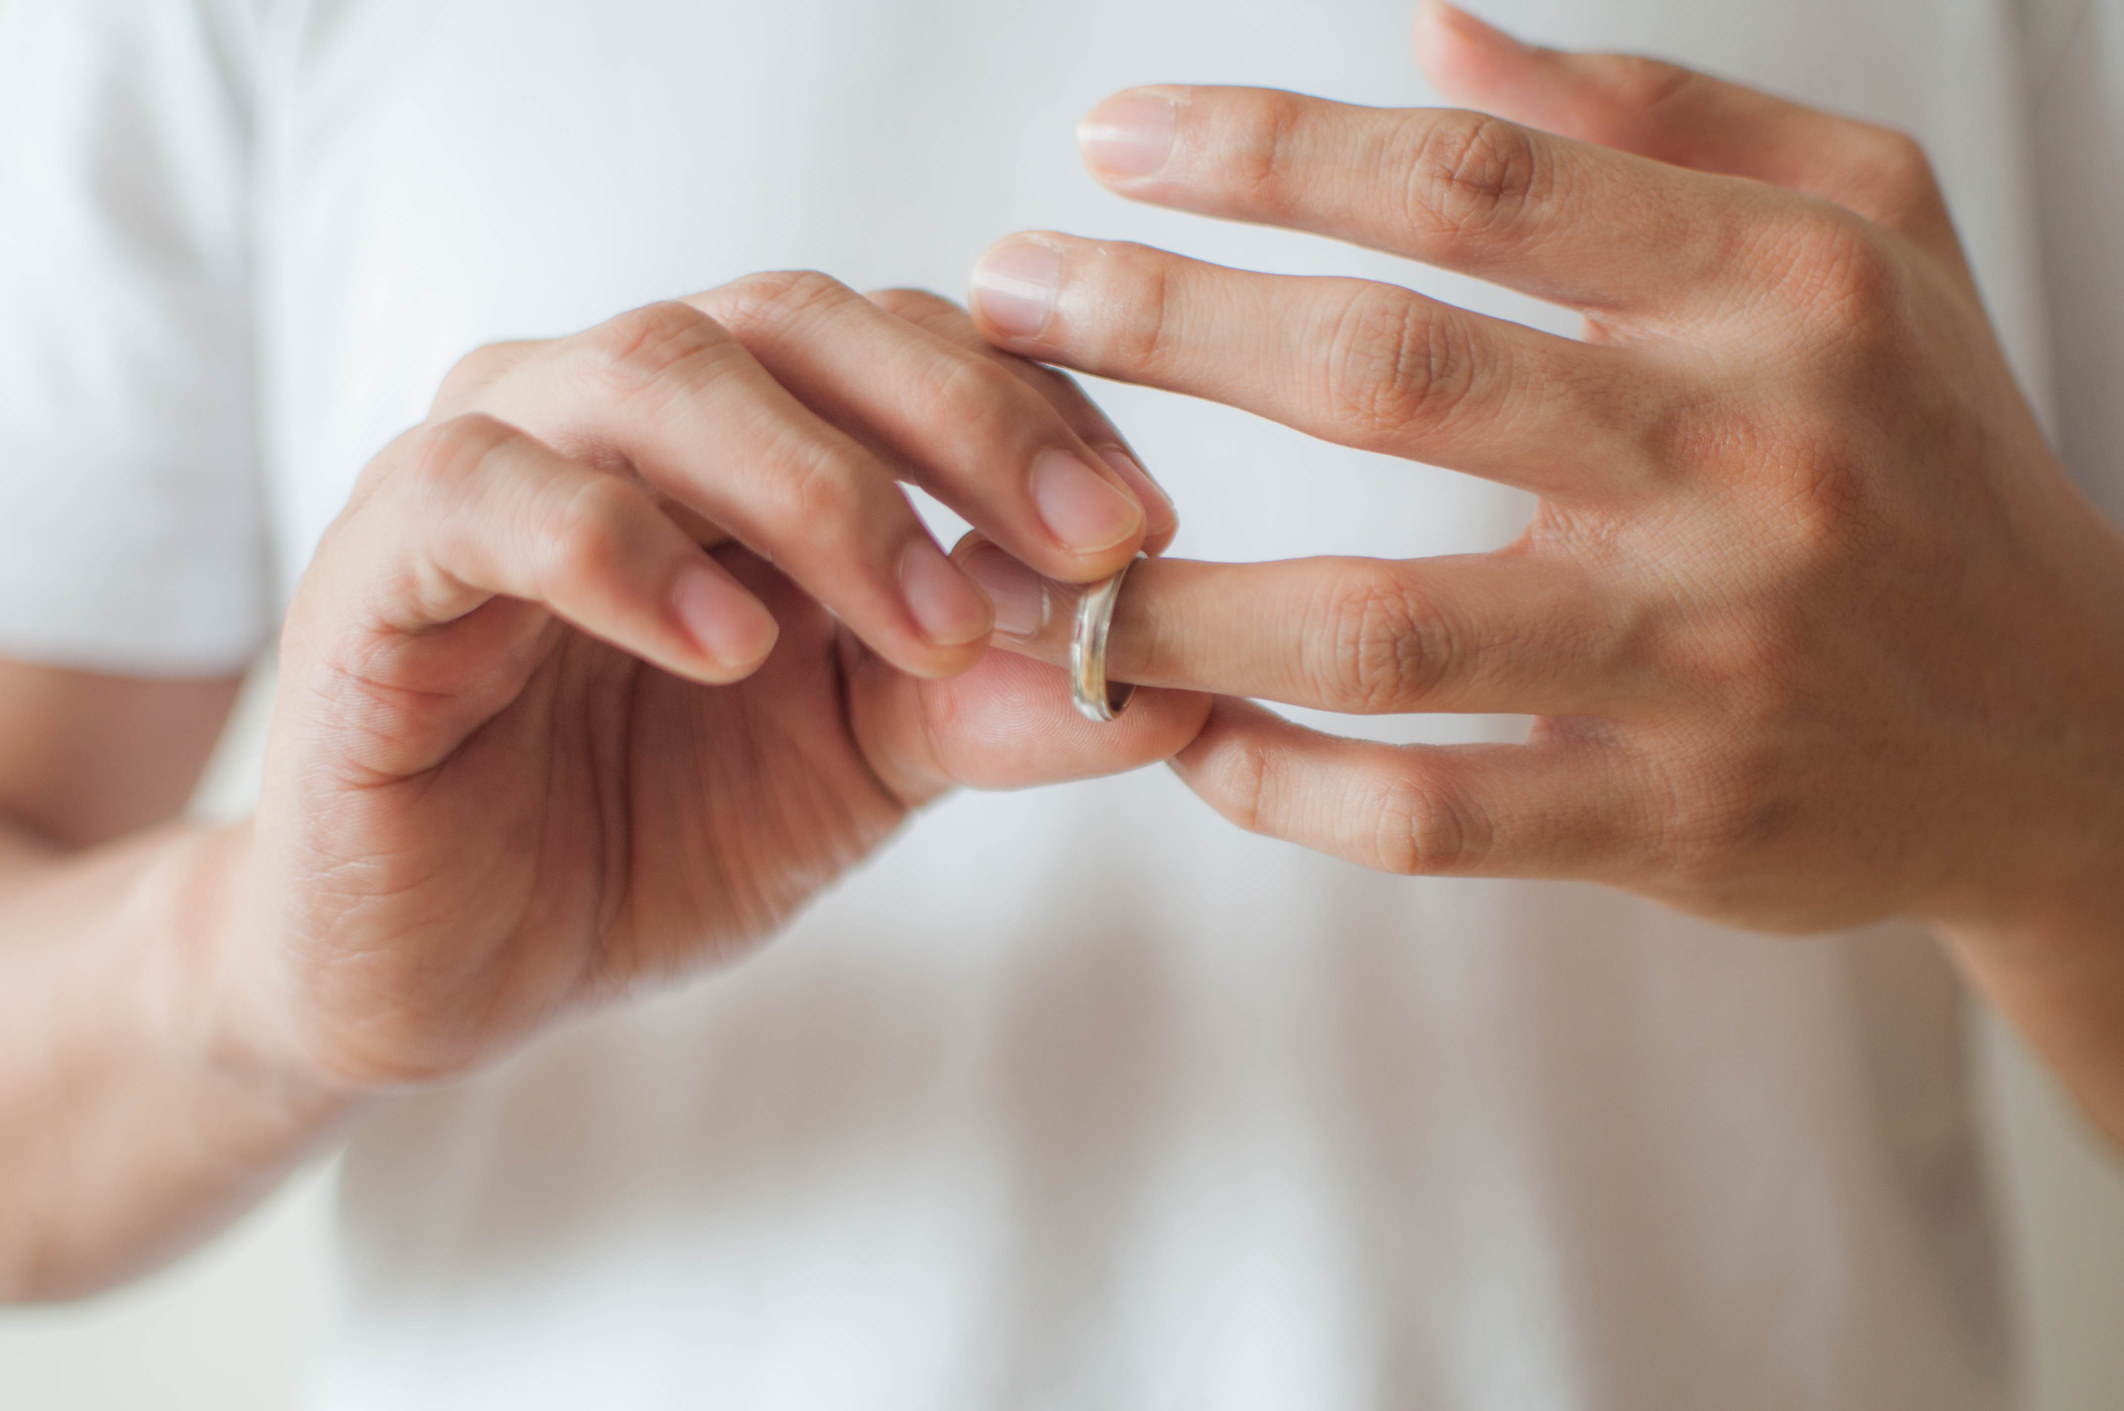 a person taking off a wedding ring